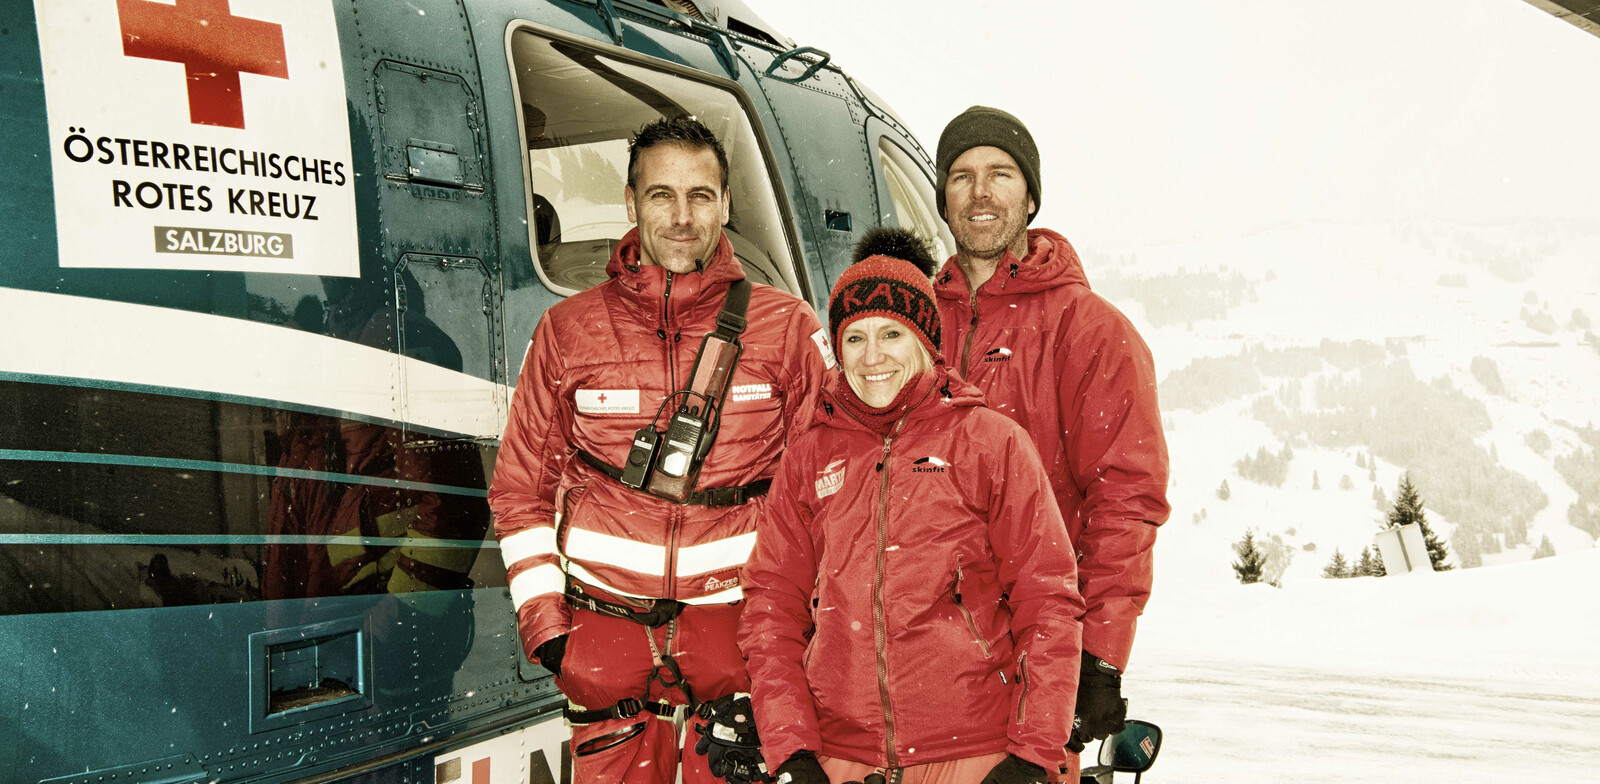 The crew (from left to right):  Toni Voithofer, Dr. Katharina Spora and pilot Shannon Harding | © Edith Danzer